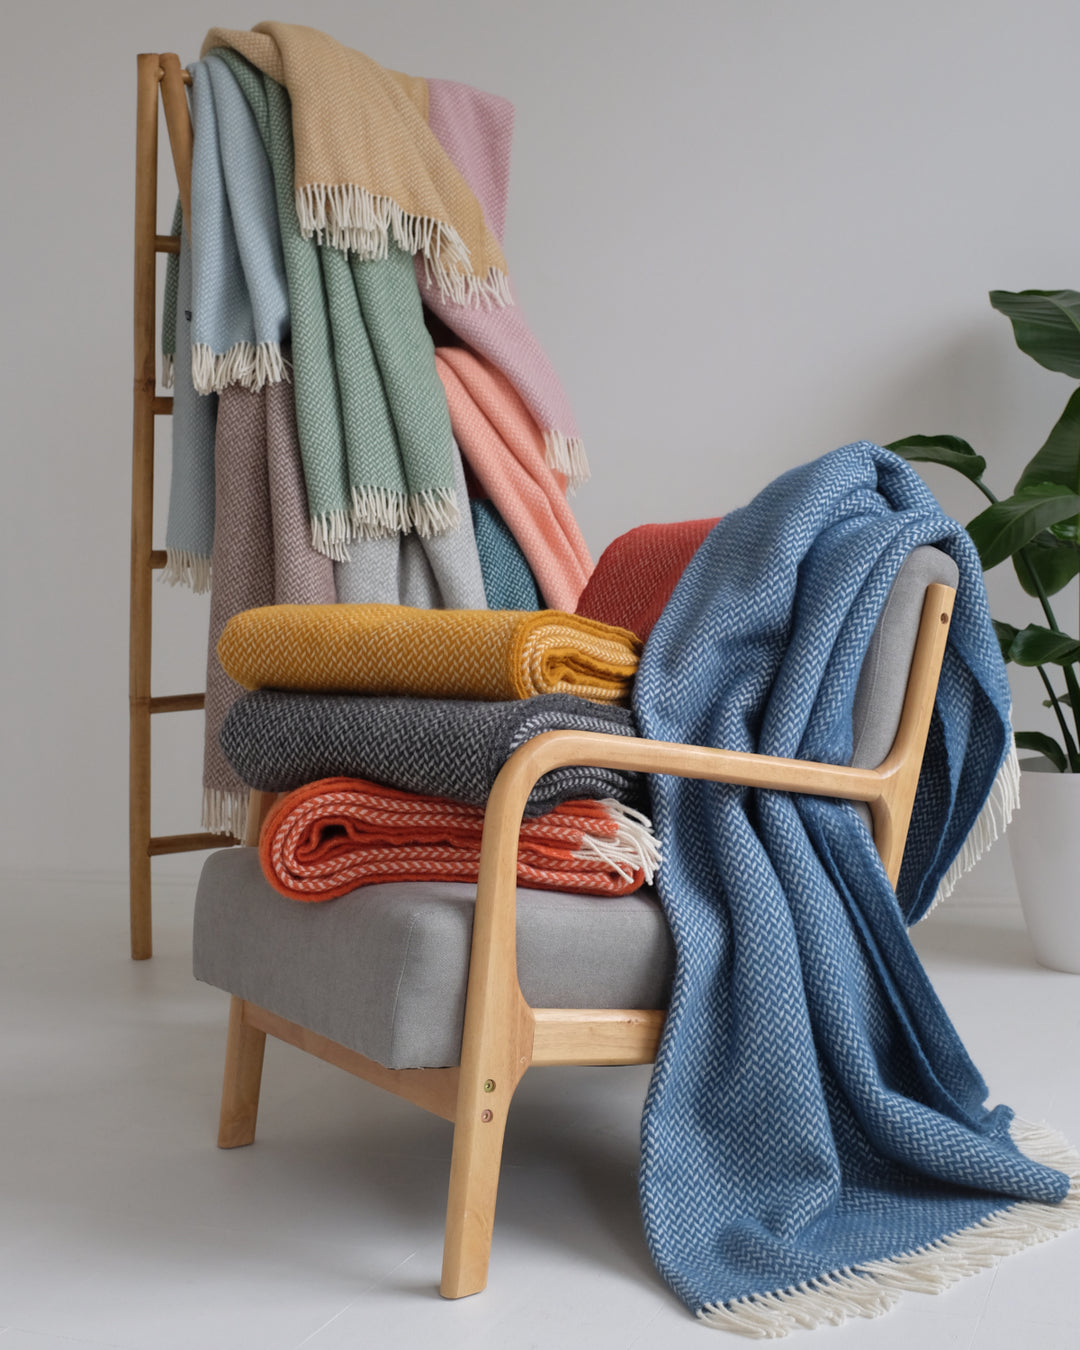 Large blue herringbone wool blanket draped over a lounge chair with a stack of folded blankets on top of the chair. Wool blankets hanging on a ladder on the left of the chair